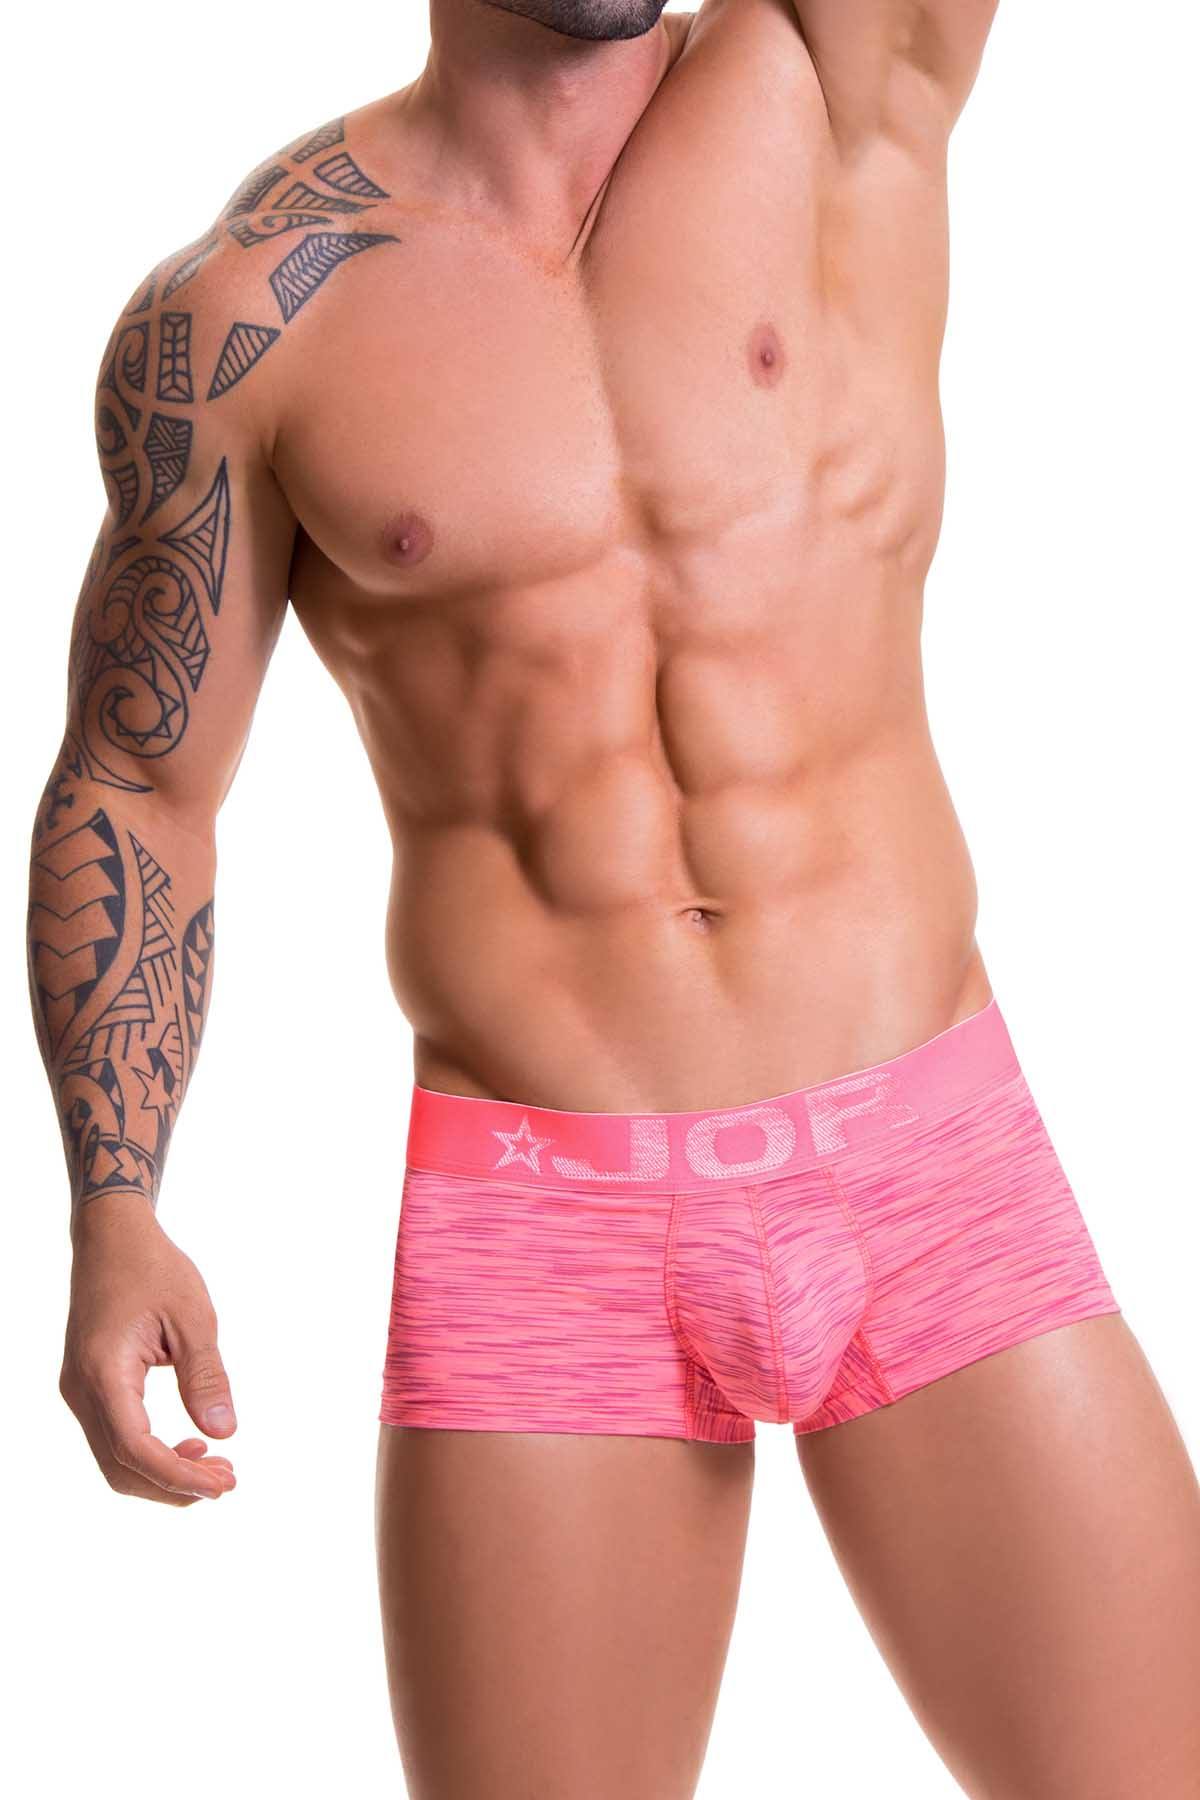 Jor Pink Space-Dye Napoly Trunk